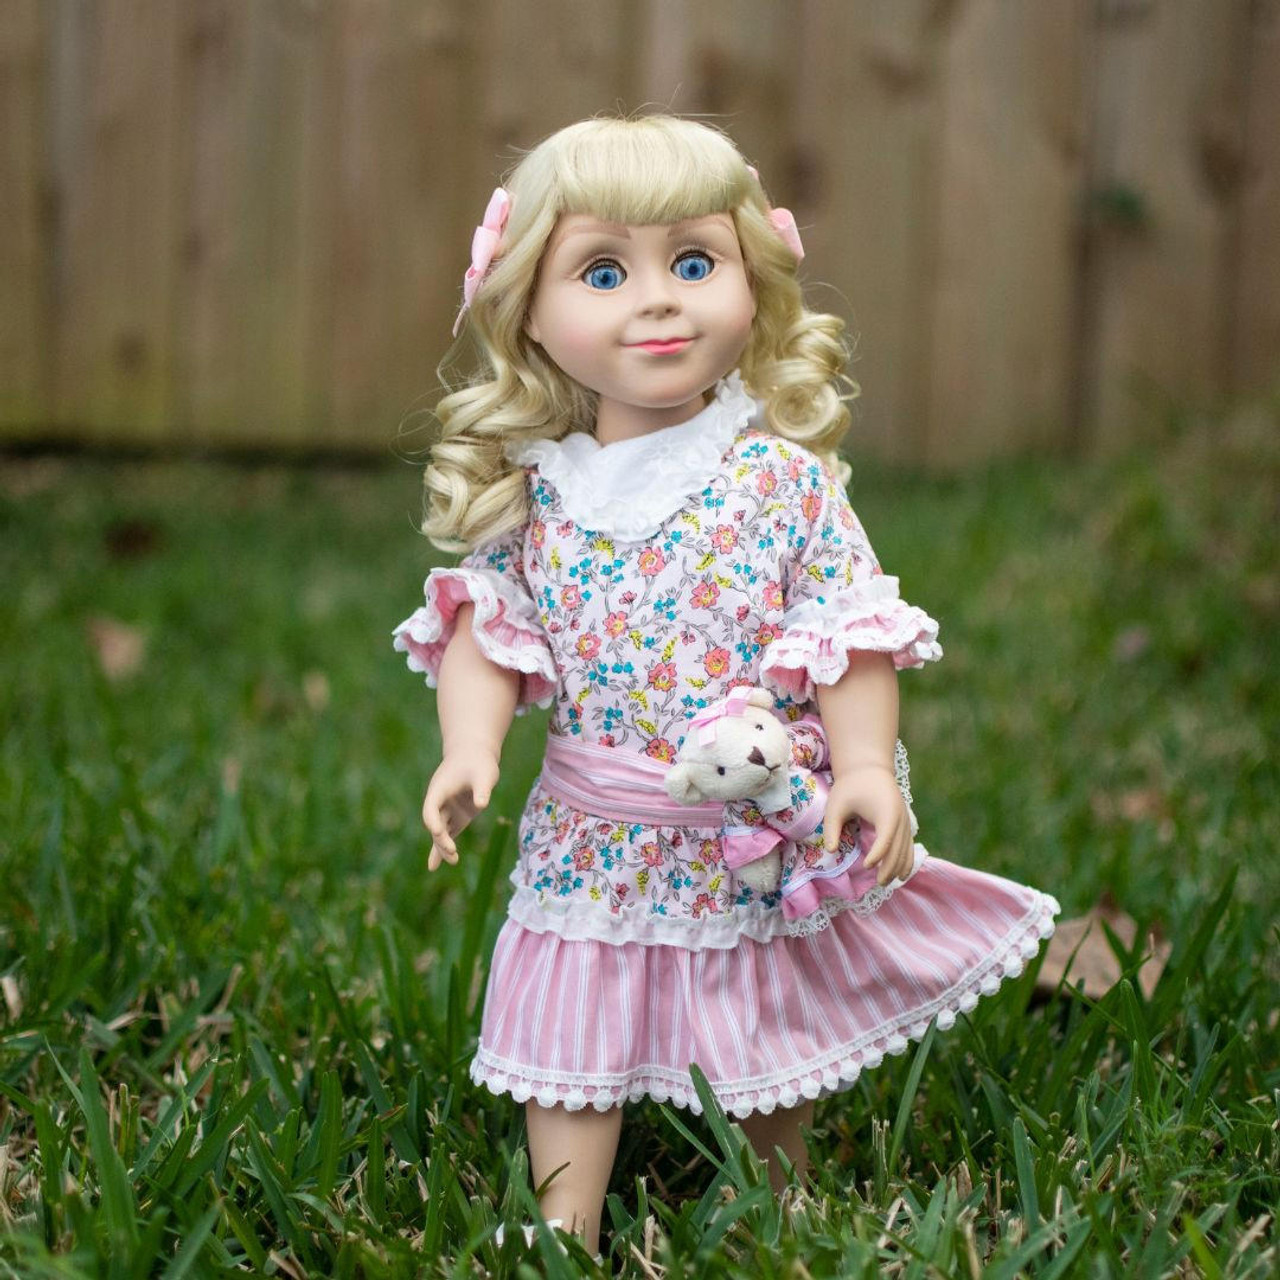 https://cdn11.bigcommerce.com/s-m5vcu70215/images/stencil/1280x1280/products/248/2537/the-queens-treasures-little-house-on-the-prairie-nellie-oleson-18-inch-doll__44832.1692302489.jpg?c=1